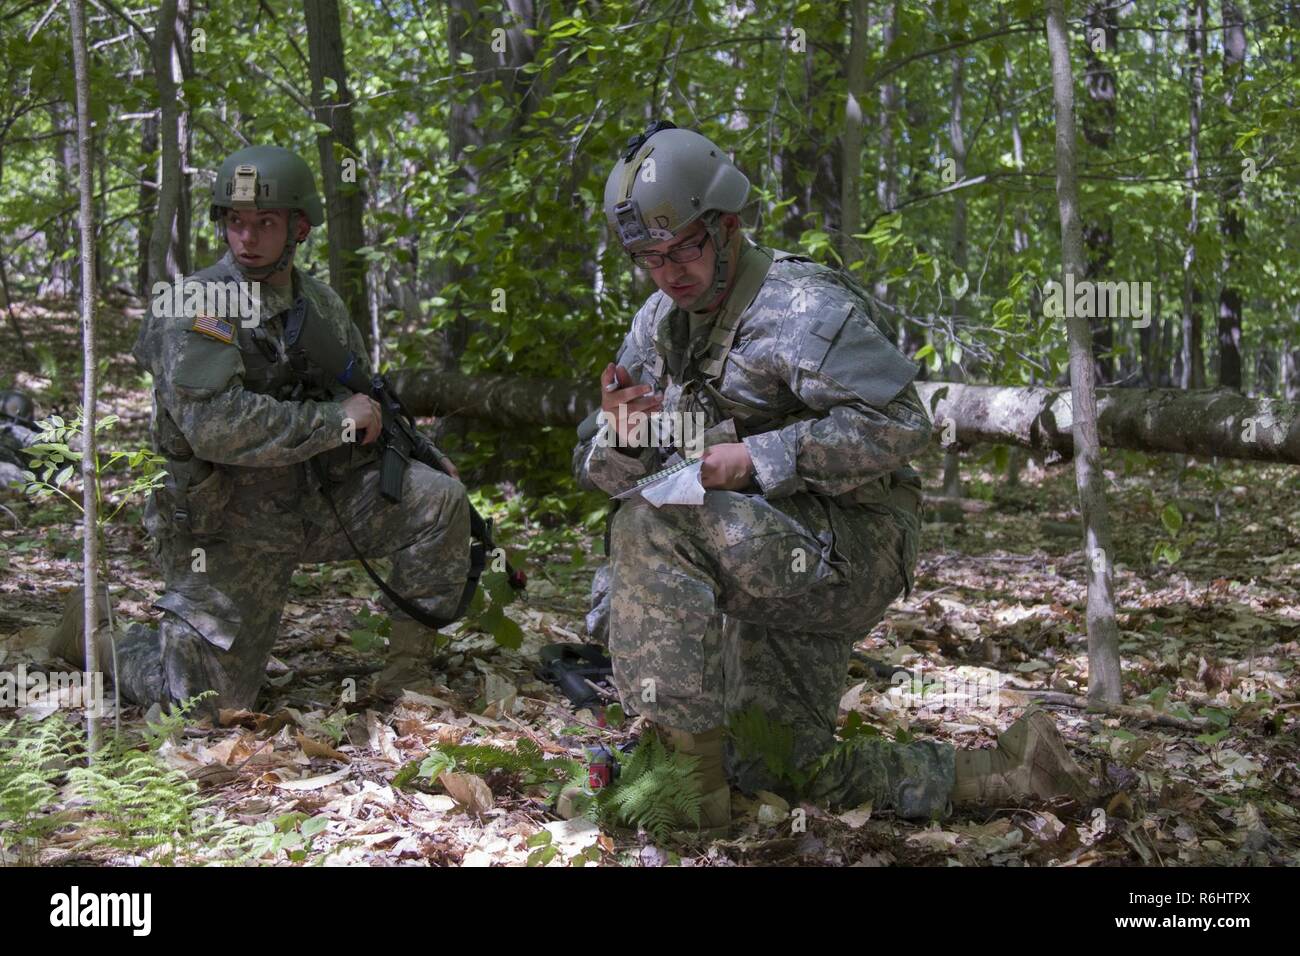 A U.S. Army officer candidate acting as squad leader sends up a SALUTE report during a bunker clearing lane at New Hampshire National Guard Training Site in Center Strafford, Nh., May 19, 2017. Soldiers from Connecticut, Maine, Massachusetts, New Hampshire, New Jersey, New York, Rhode Island, and Vermont participated in the Officer Candidate School Field Leadership Exercise in preparation for graduation and commission. Stock Photo